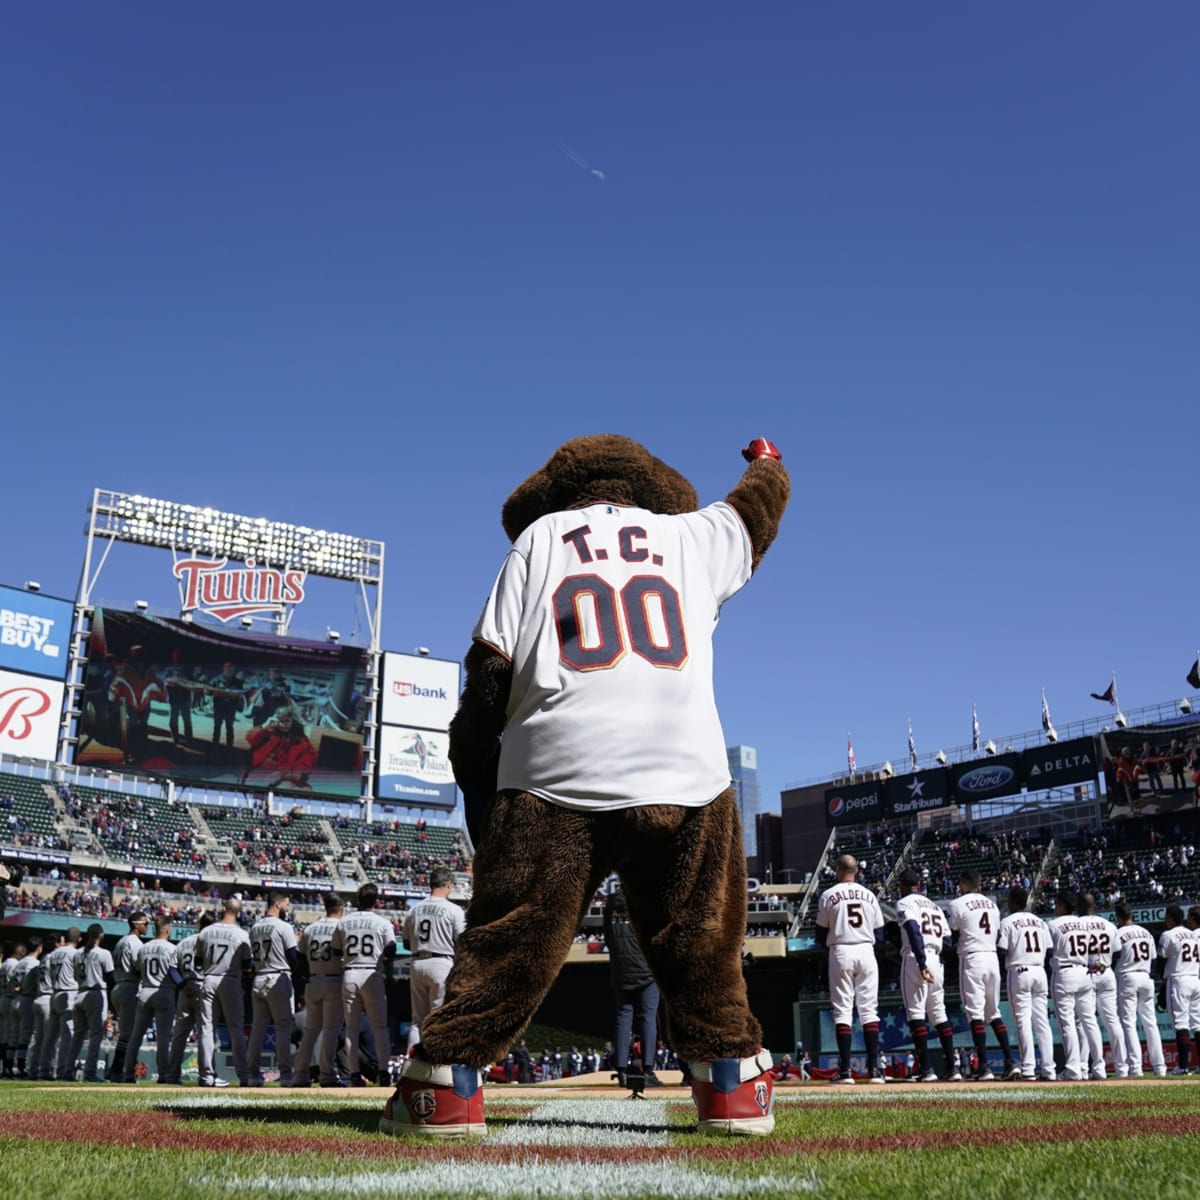 Minnesota Twins caravan will stop in these 10 cities in late